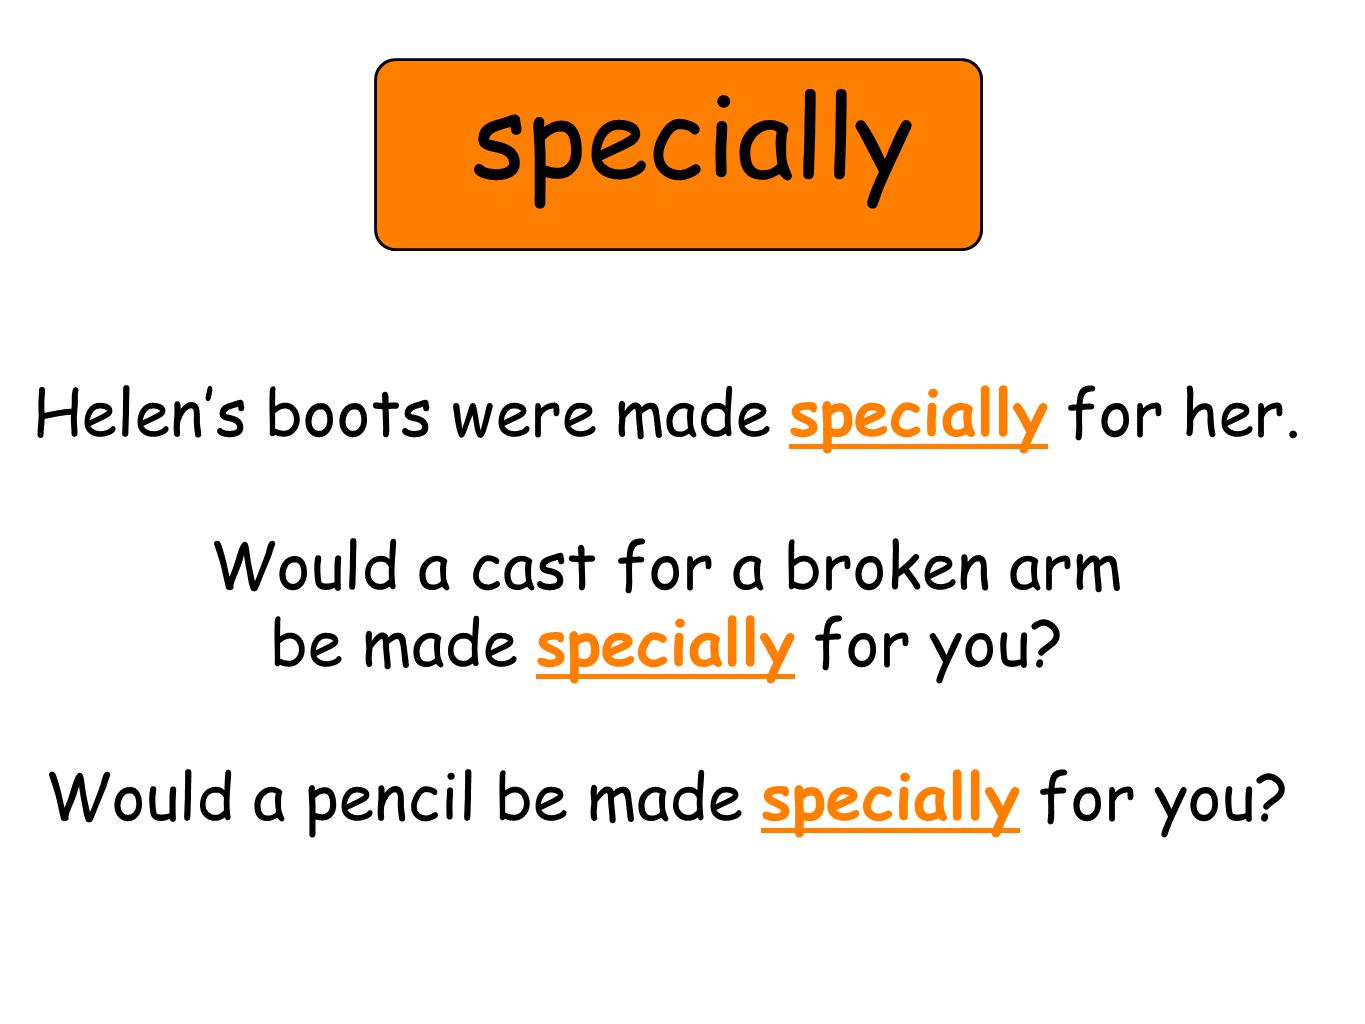 Helen’s boots were made specially for her. Would a cast for a broken arm be made specially for you.